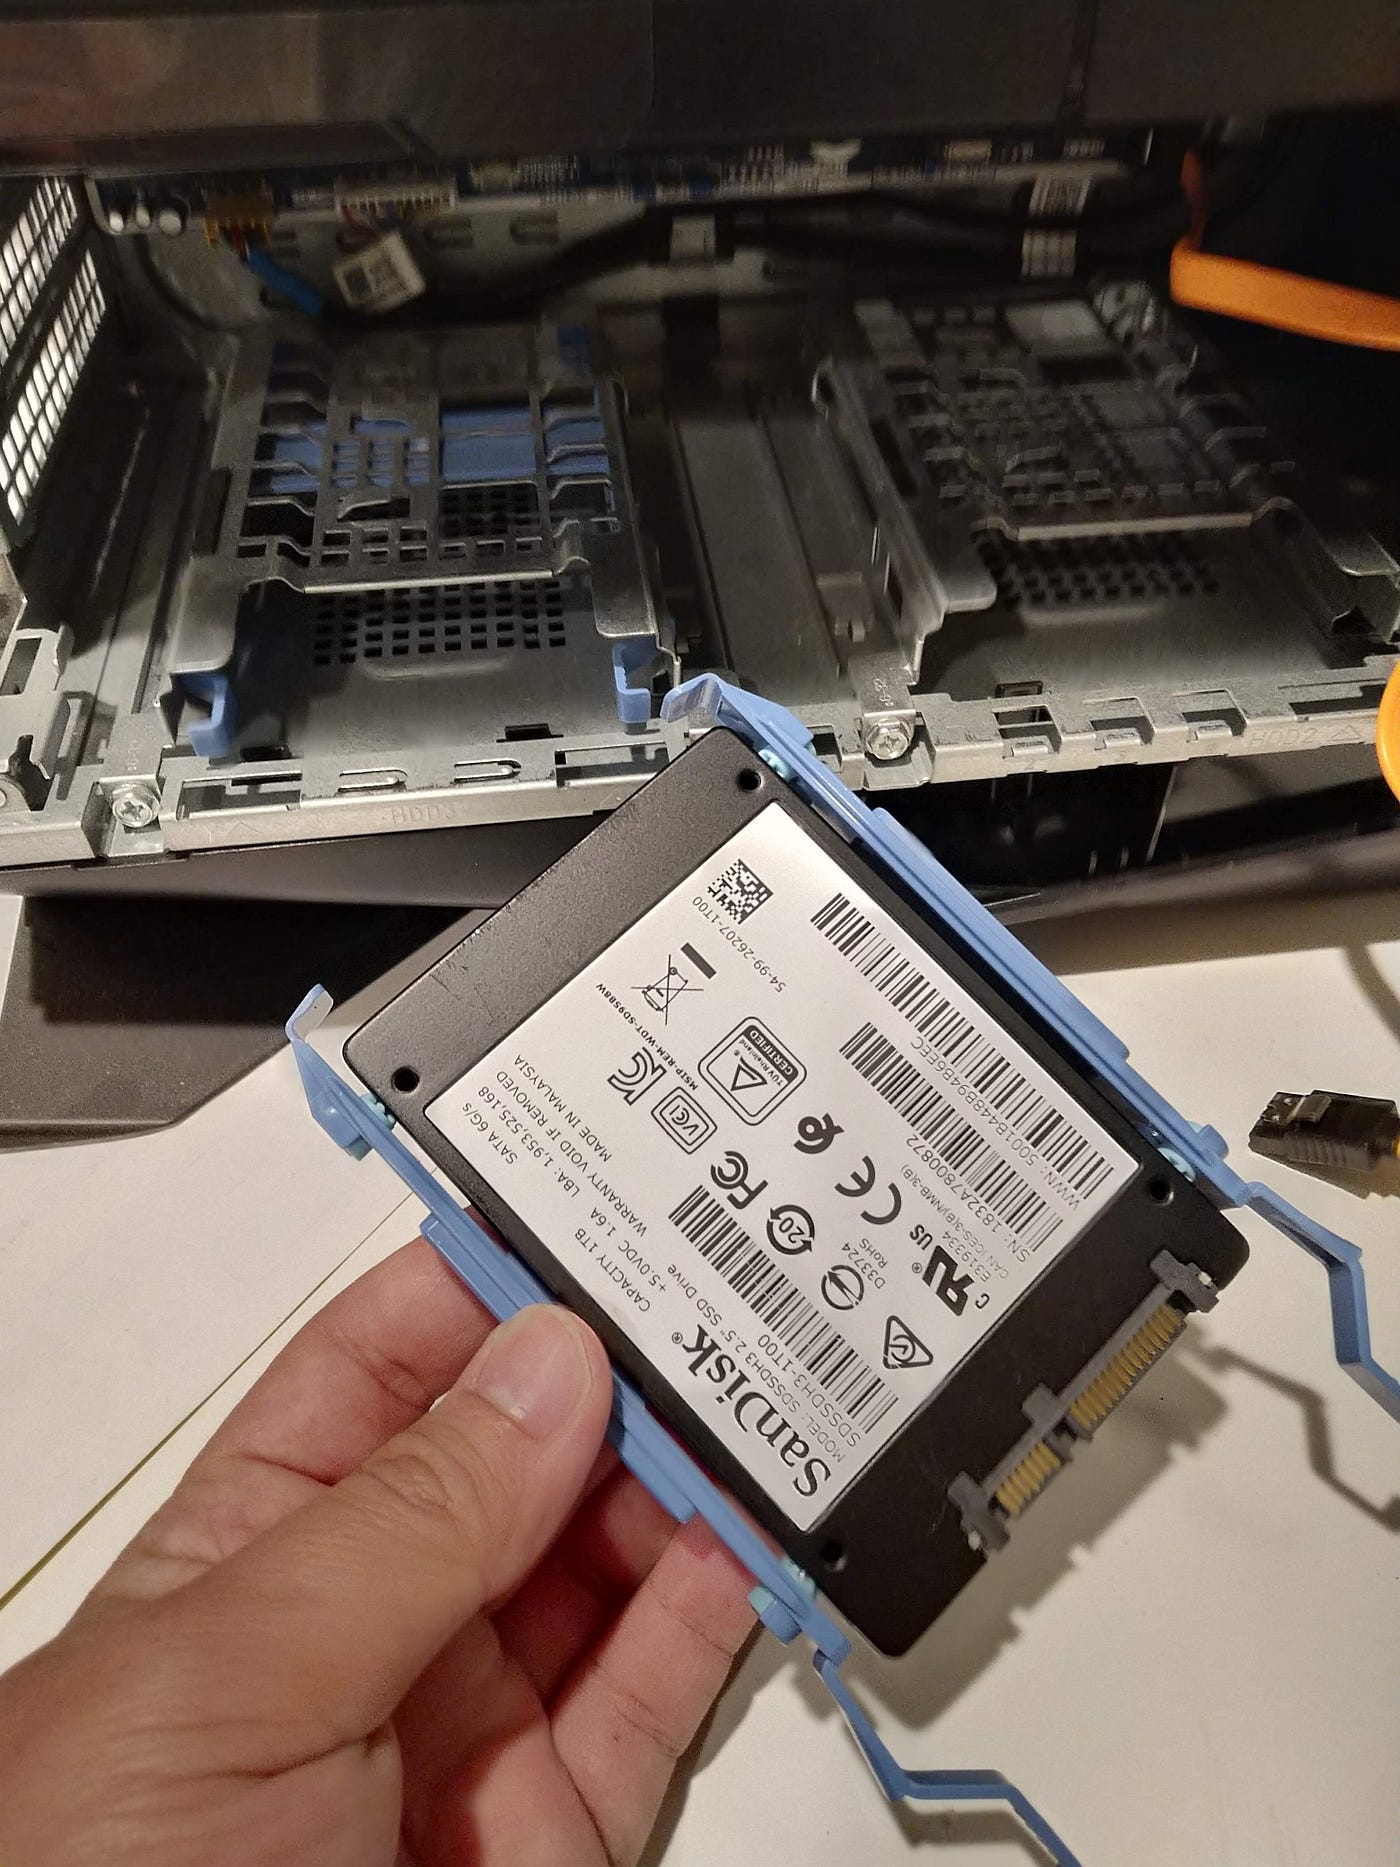 How to add an additional ssd in Alienware Aurora R7 (and other machines) |  by Jingchen LI | Medium